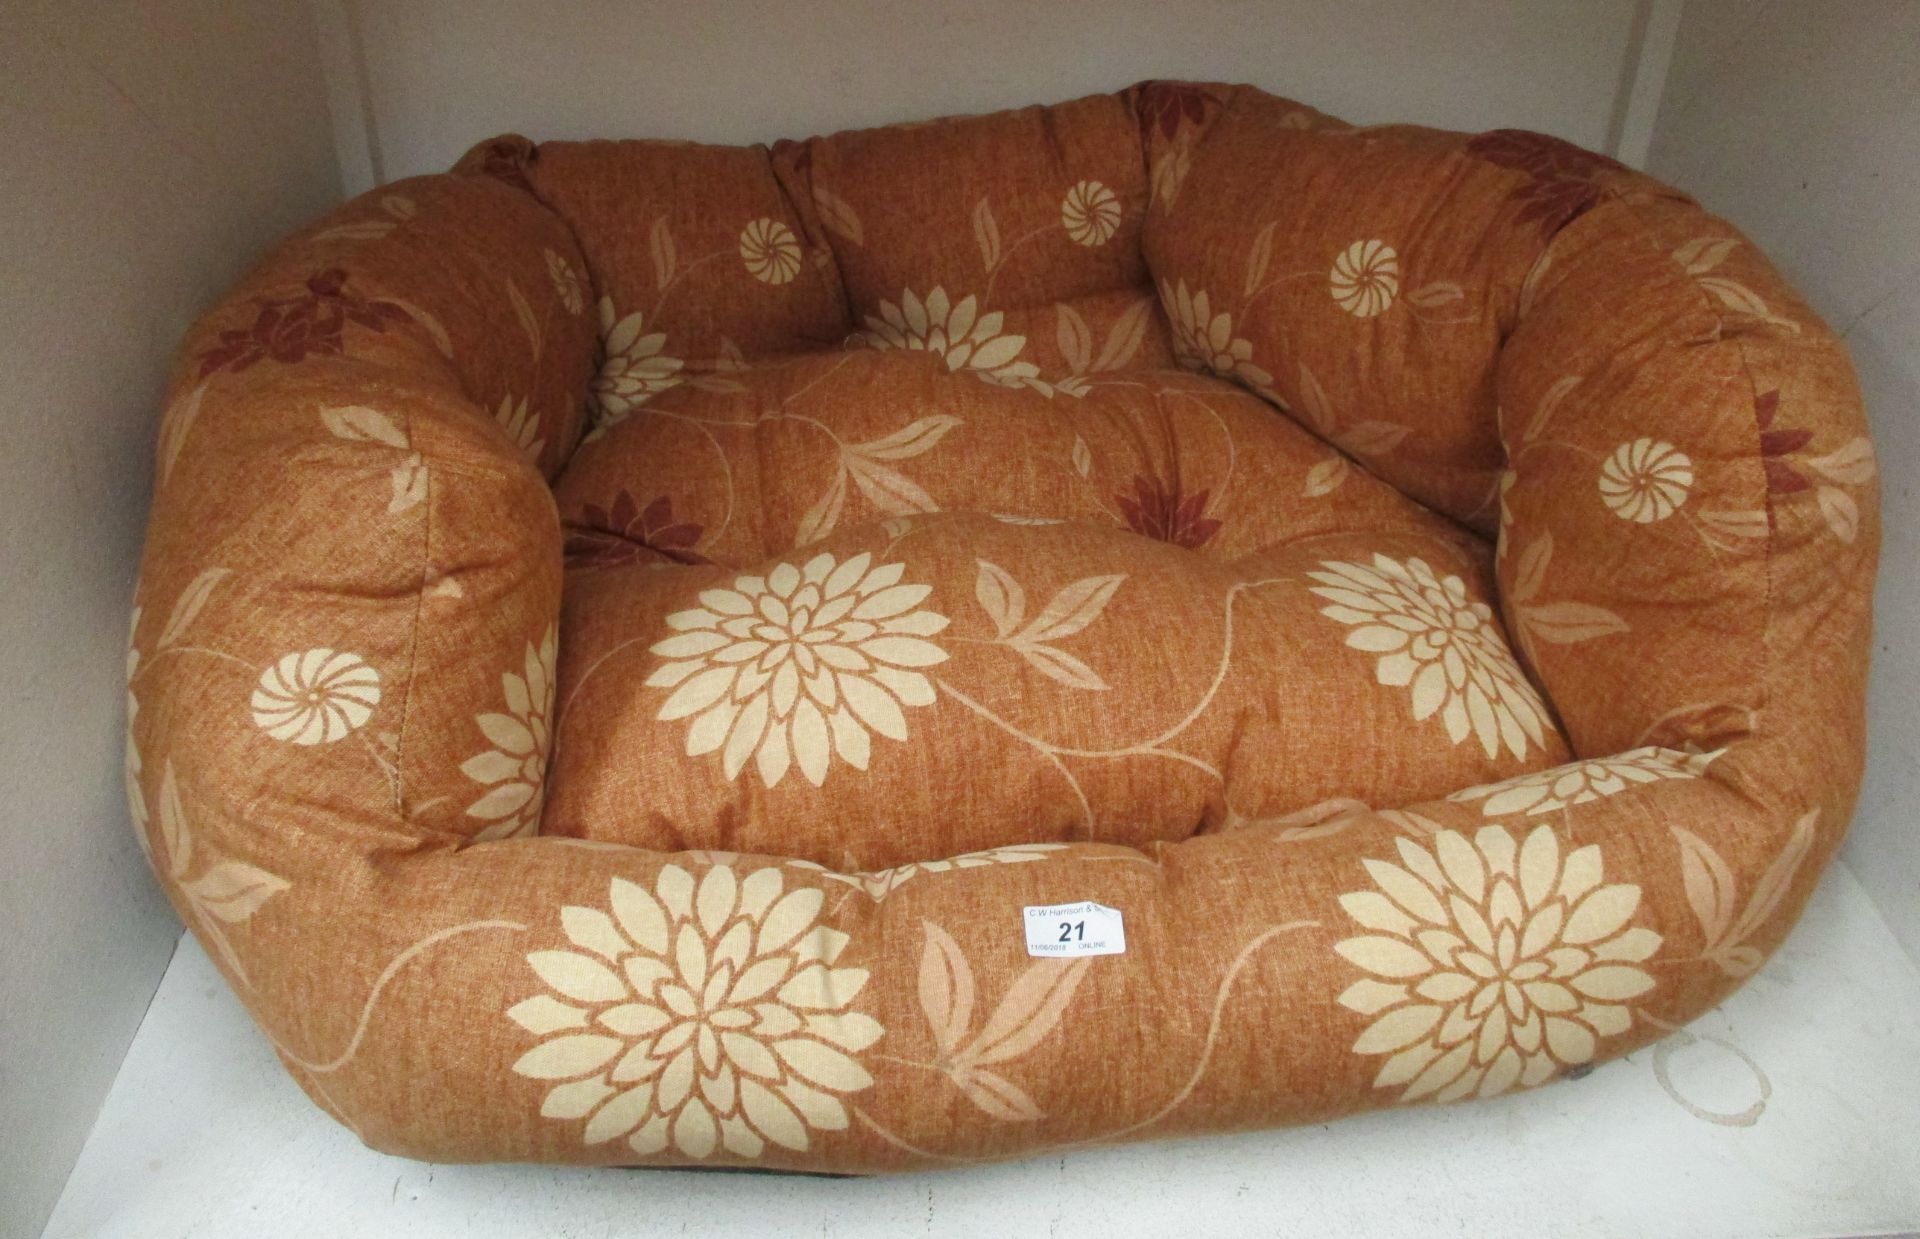 Ashcroft brown and cream floral patterne